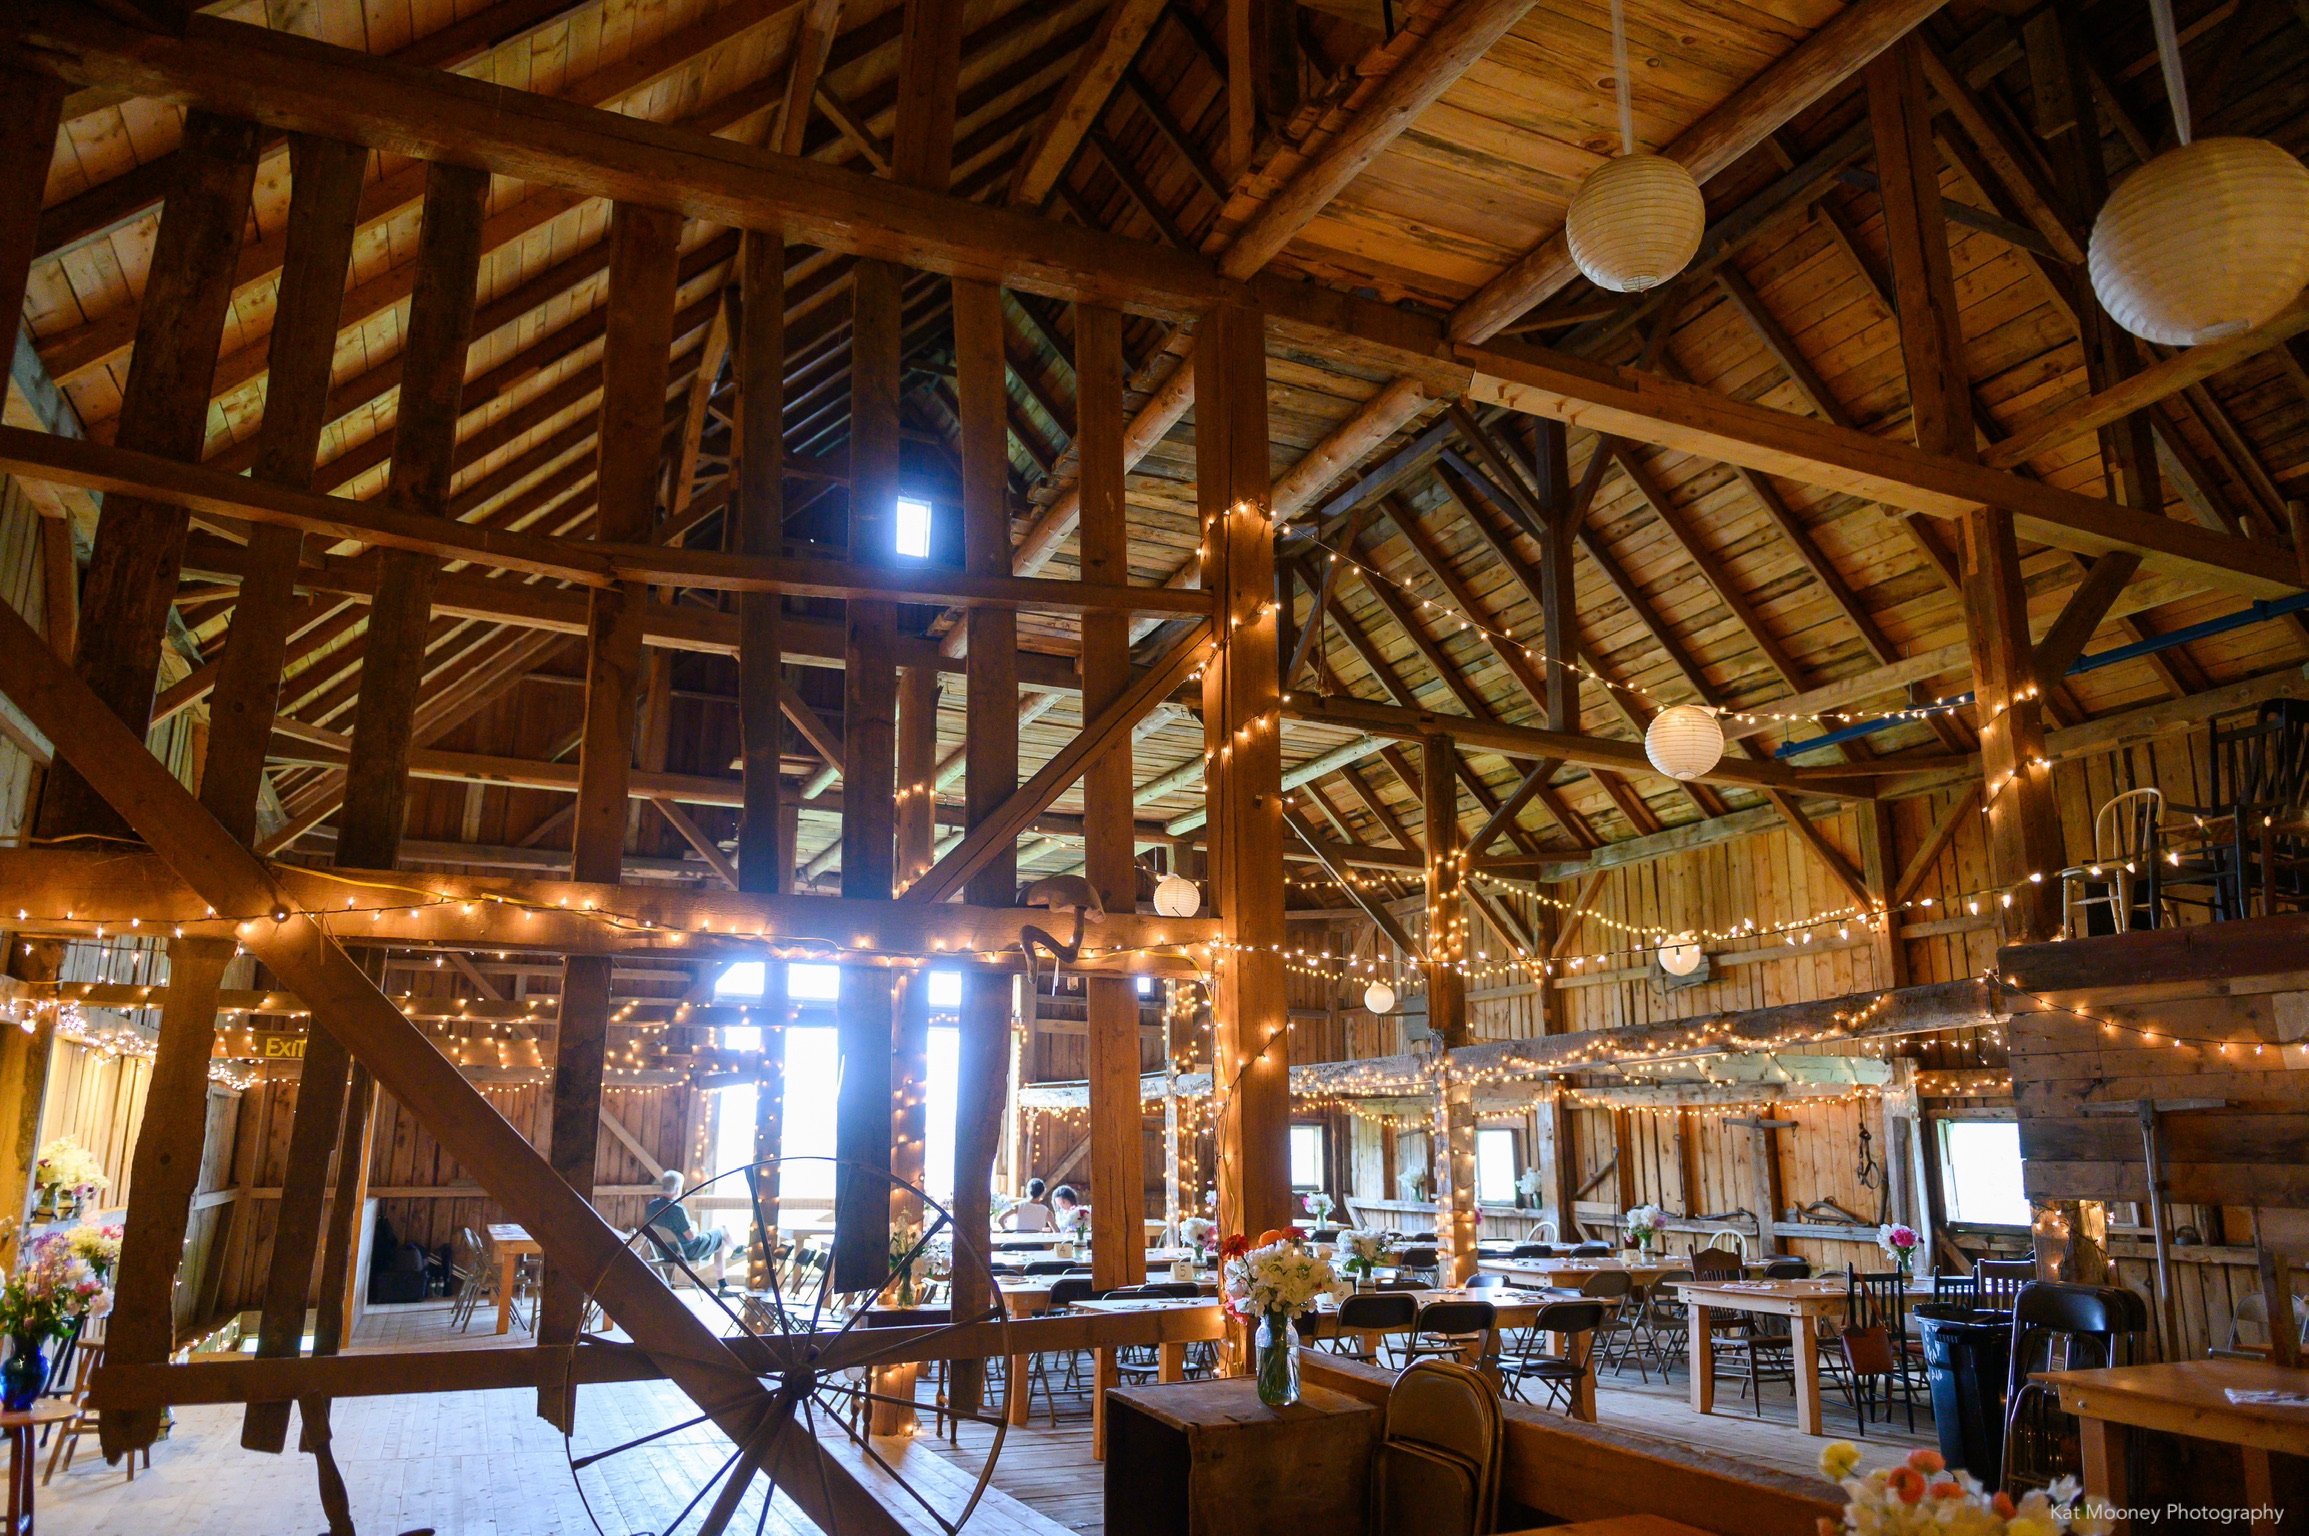 Twinkle lights light up the barn for a wedding reception